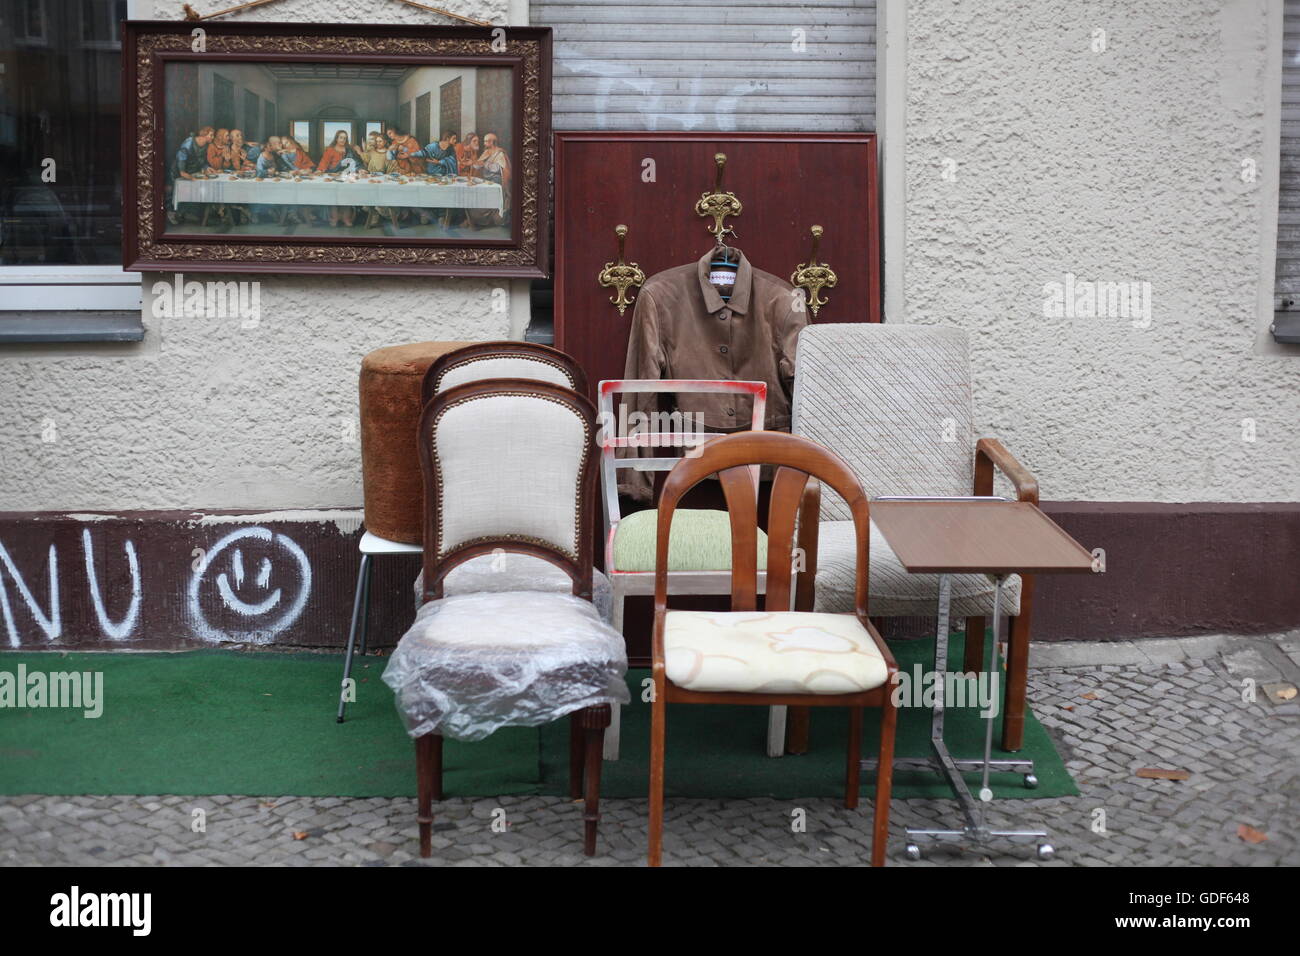 Street View of chairs and tables outside a furniture store, compare to a picture of The Last Supper (Leonardo da Vinci) Stock Photo